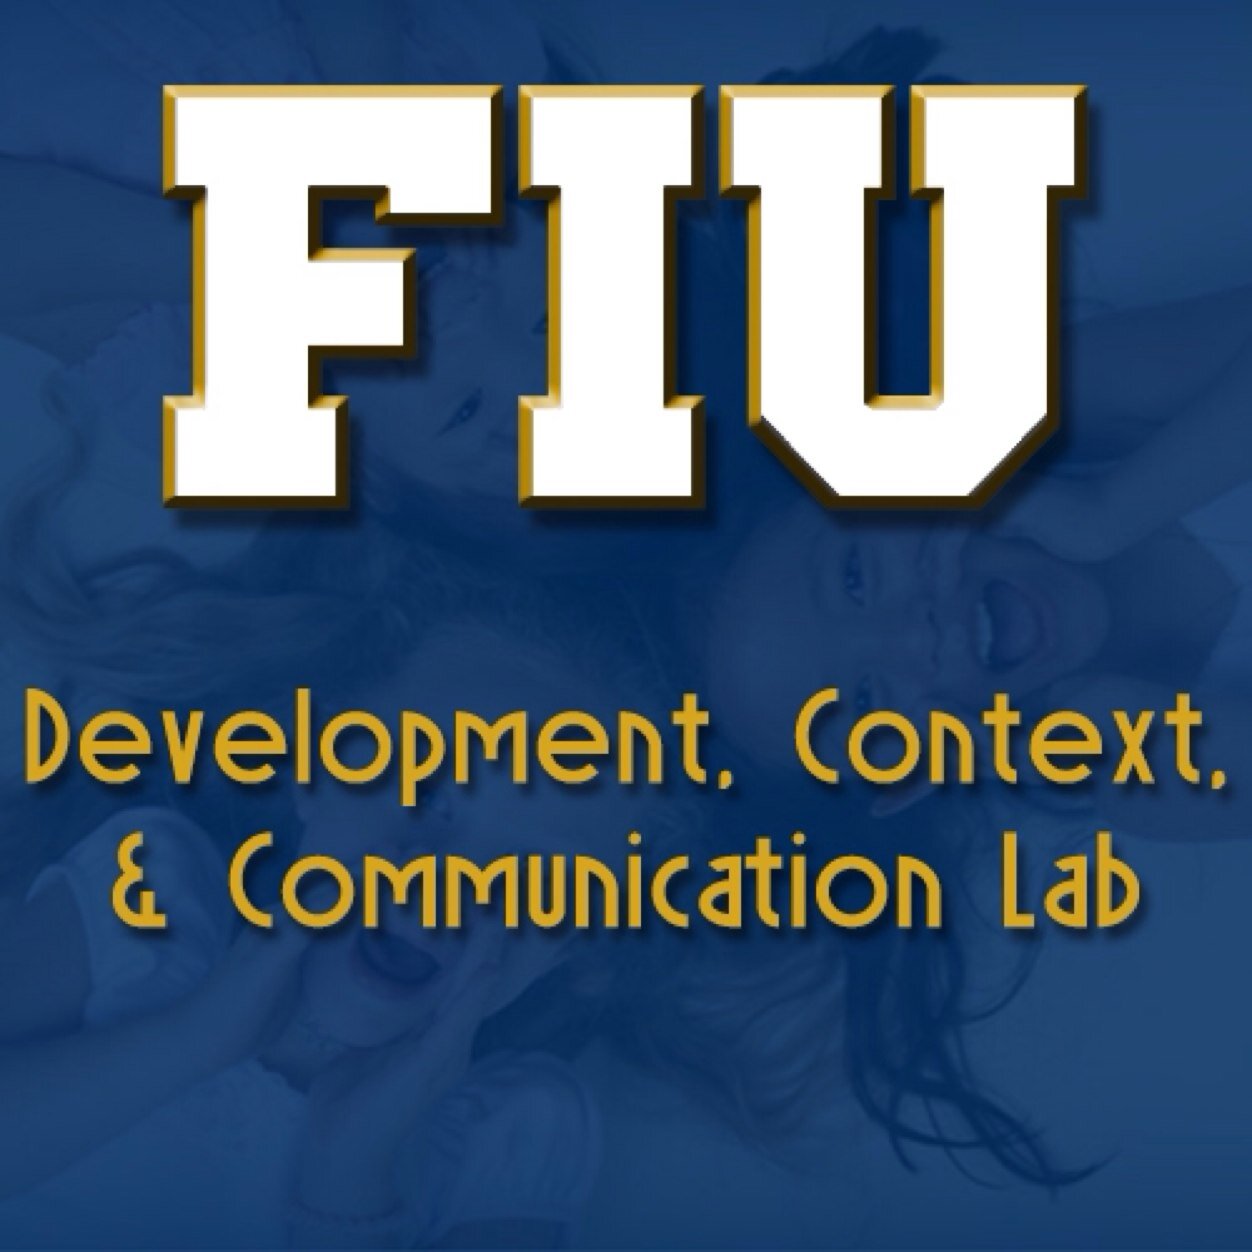 Development, Context, & Communication Lab. We study children's and teens' cognitive and social development! E-mail us at dcclab@fiu.edu to learn more!